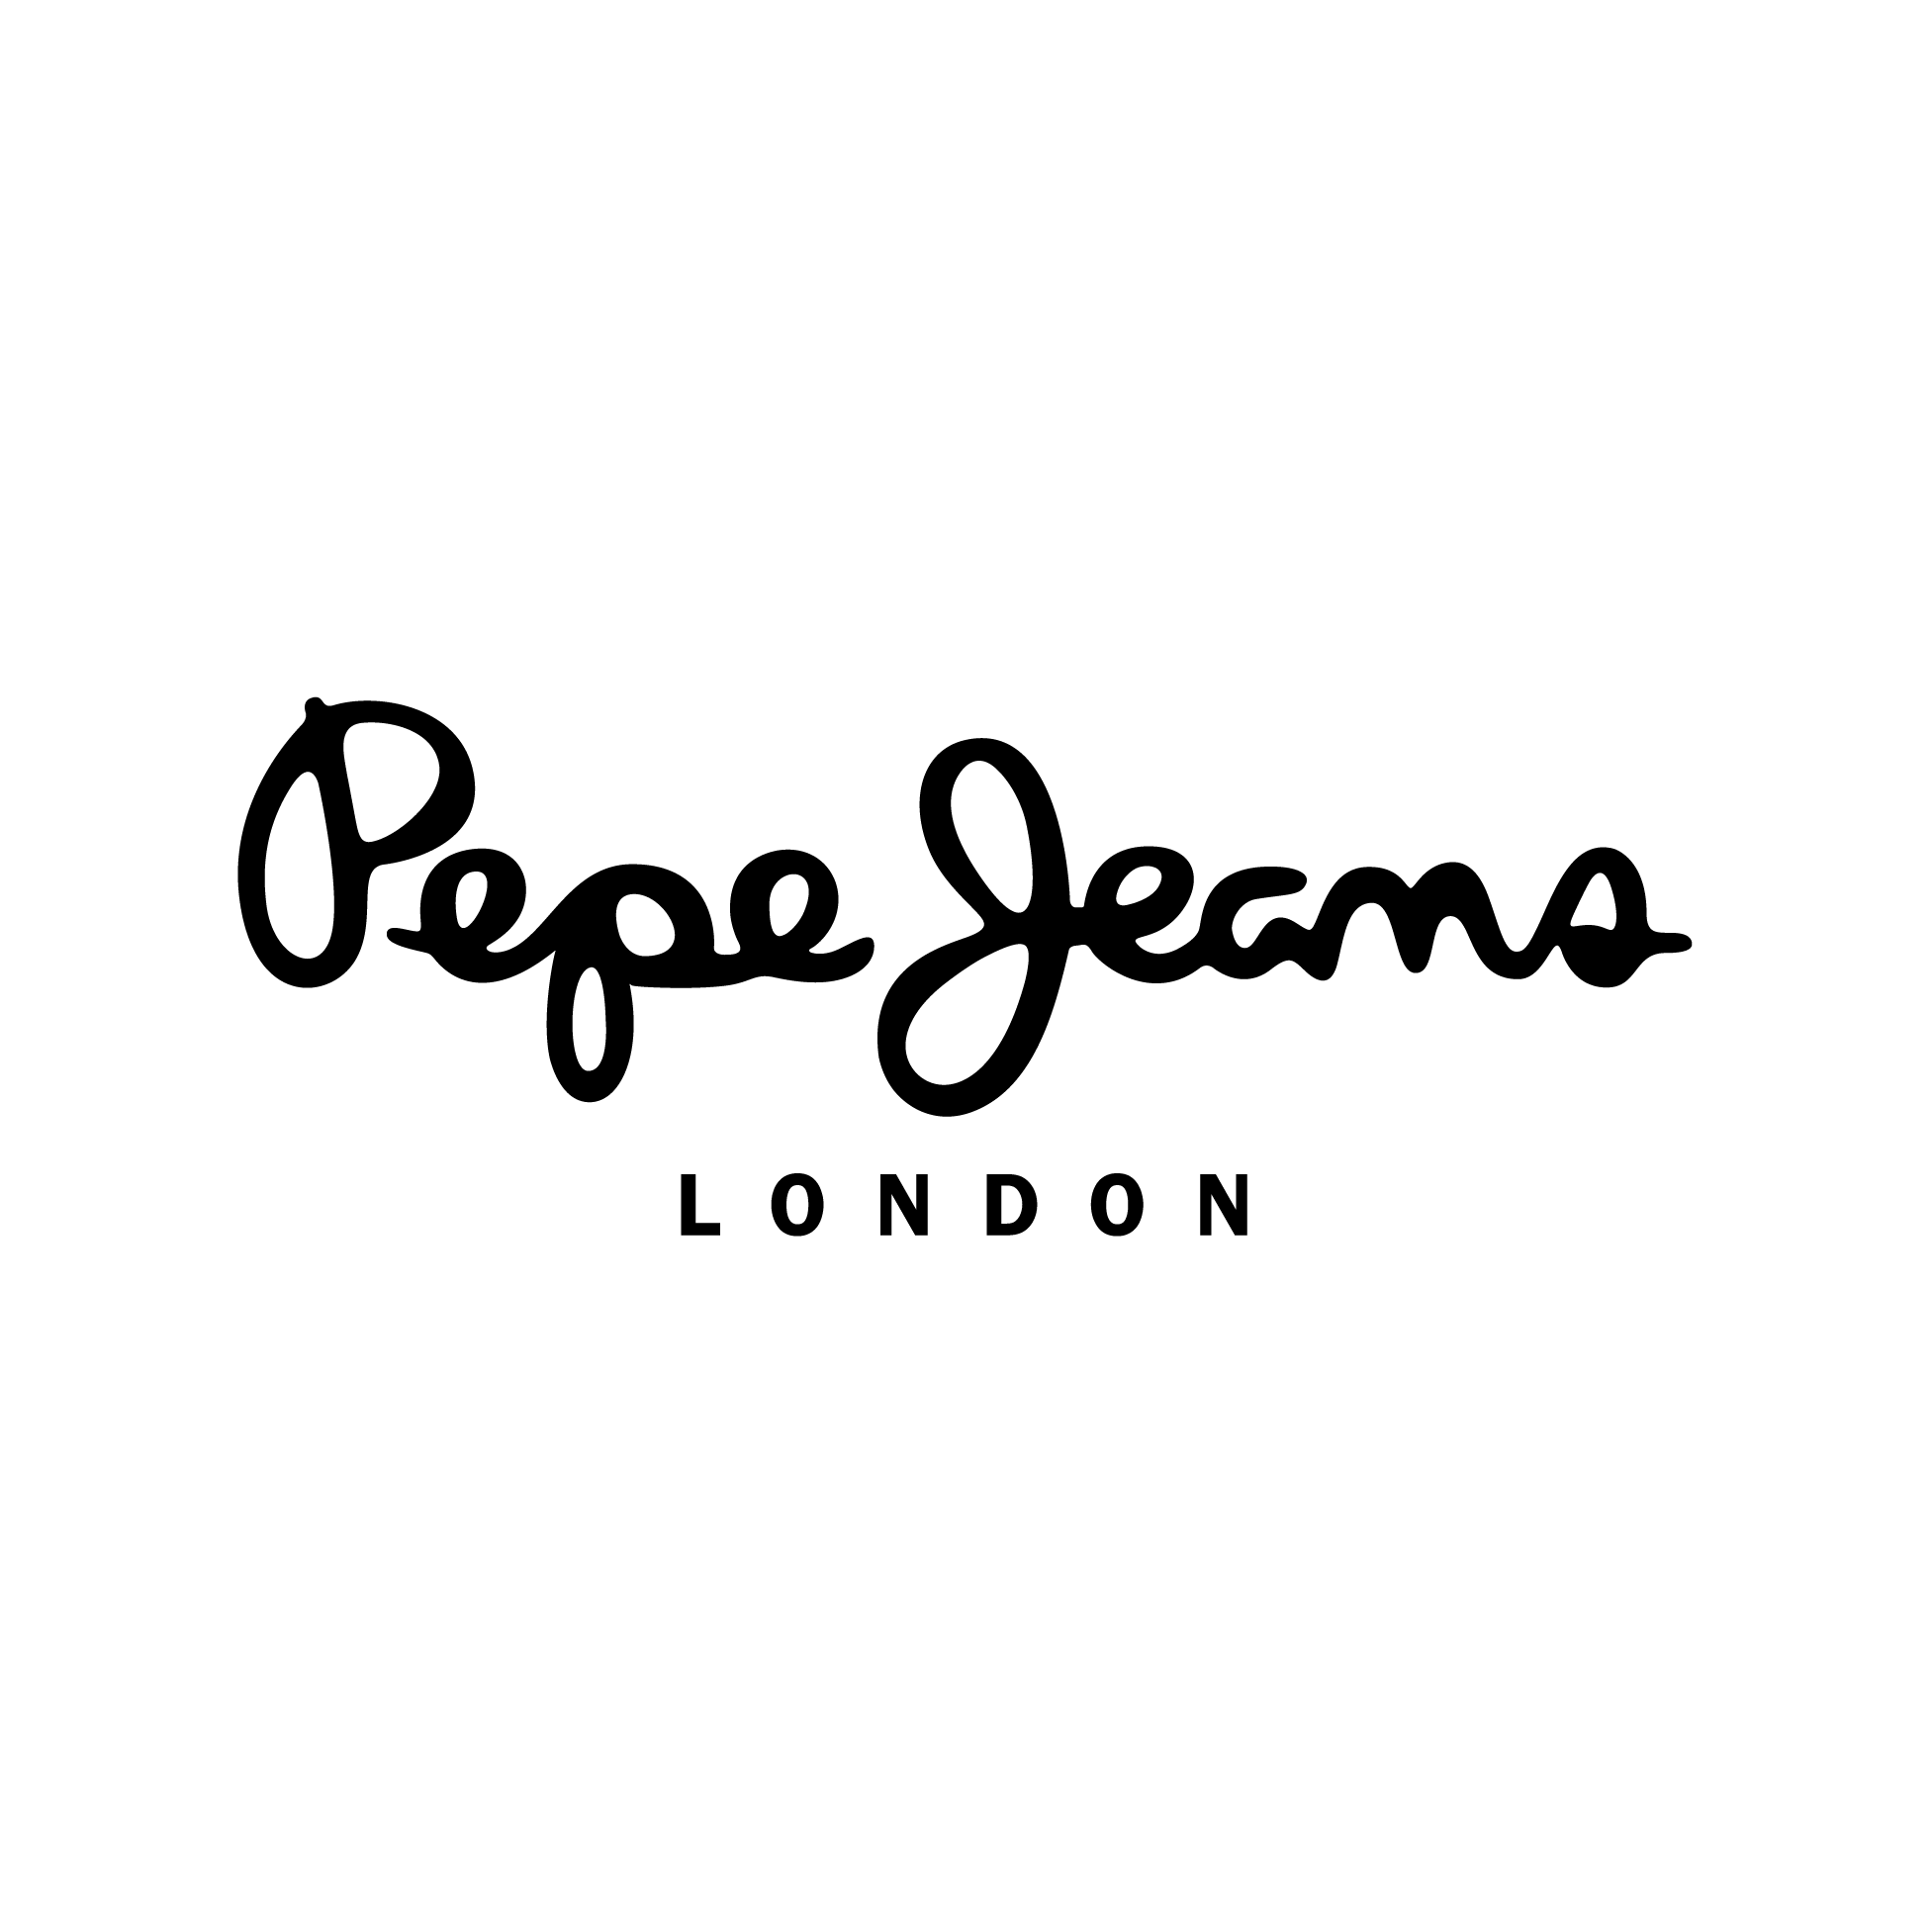 Logo von Pepe Jeans Halle Leipzig The Style Outlets